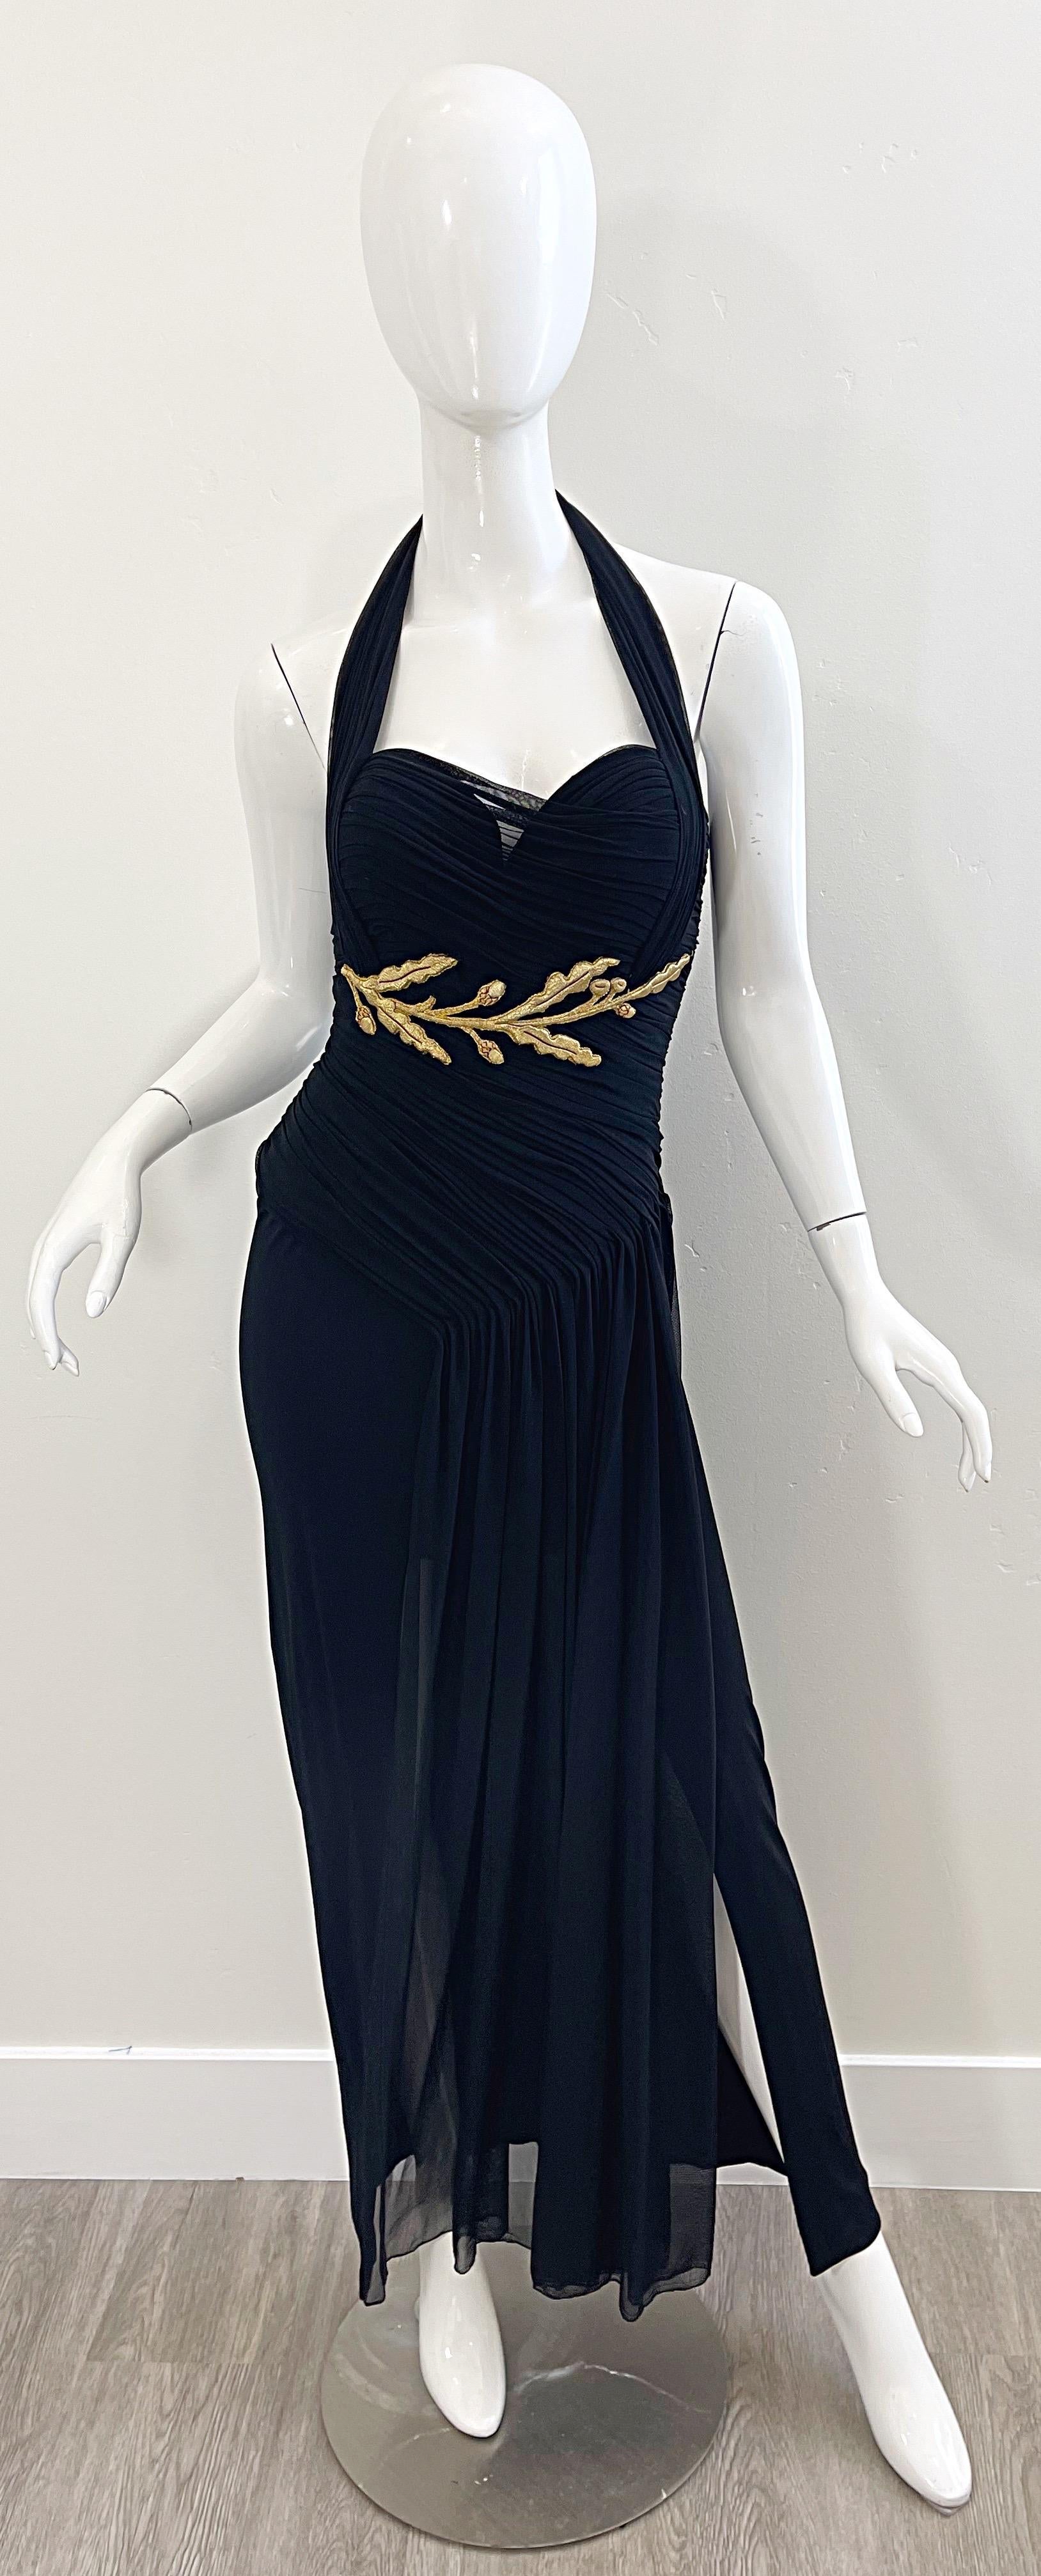 Gorgeous vintage 80s VICKY TIEL COUTURE black silk mesh halter gown ! This dress has it all—flattering ruched boned bodice, gold leaf embroidery, and a sexy slit that reveals just the right amount of leg. Hidden zipper up the back with hook-and-eye